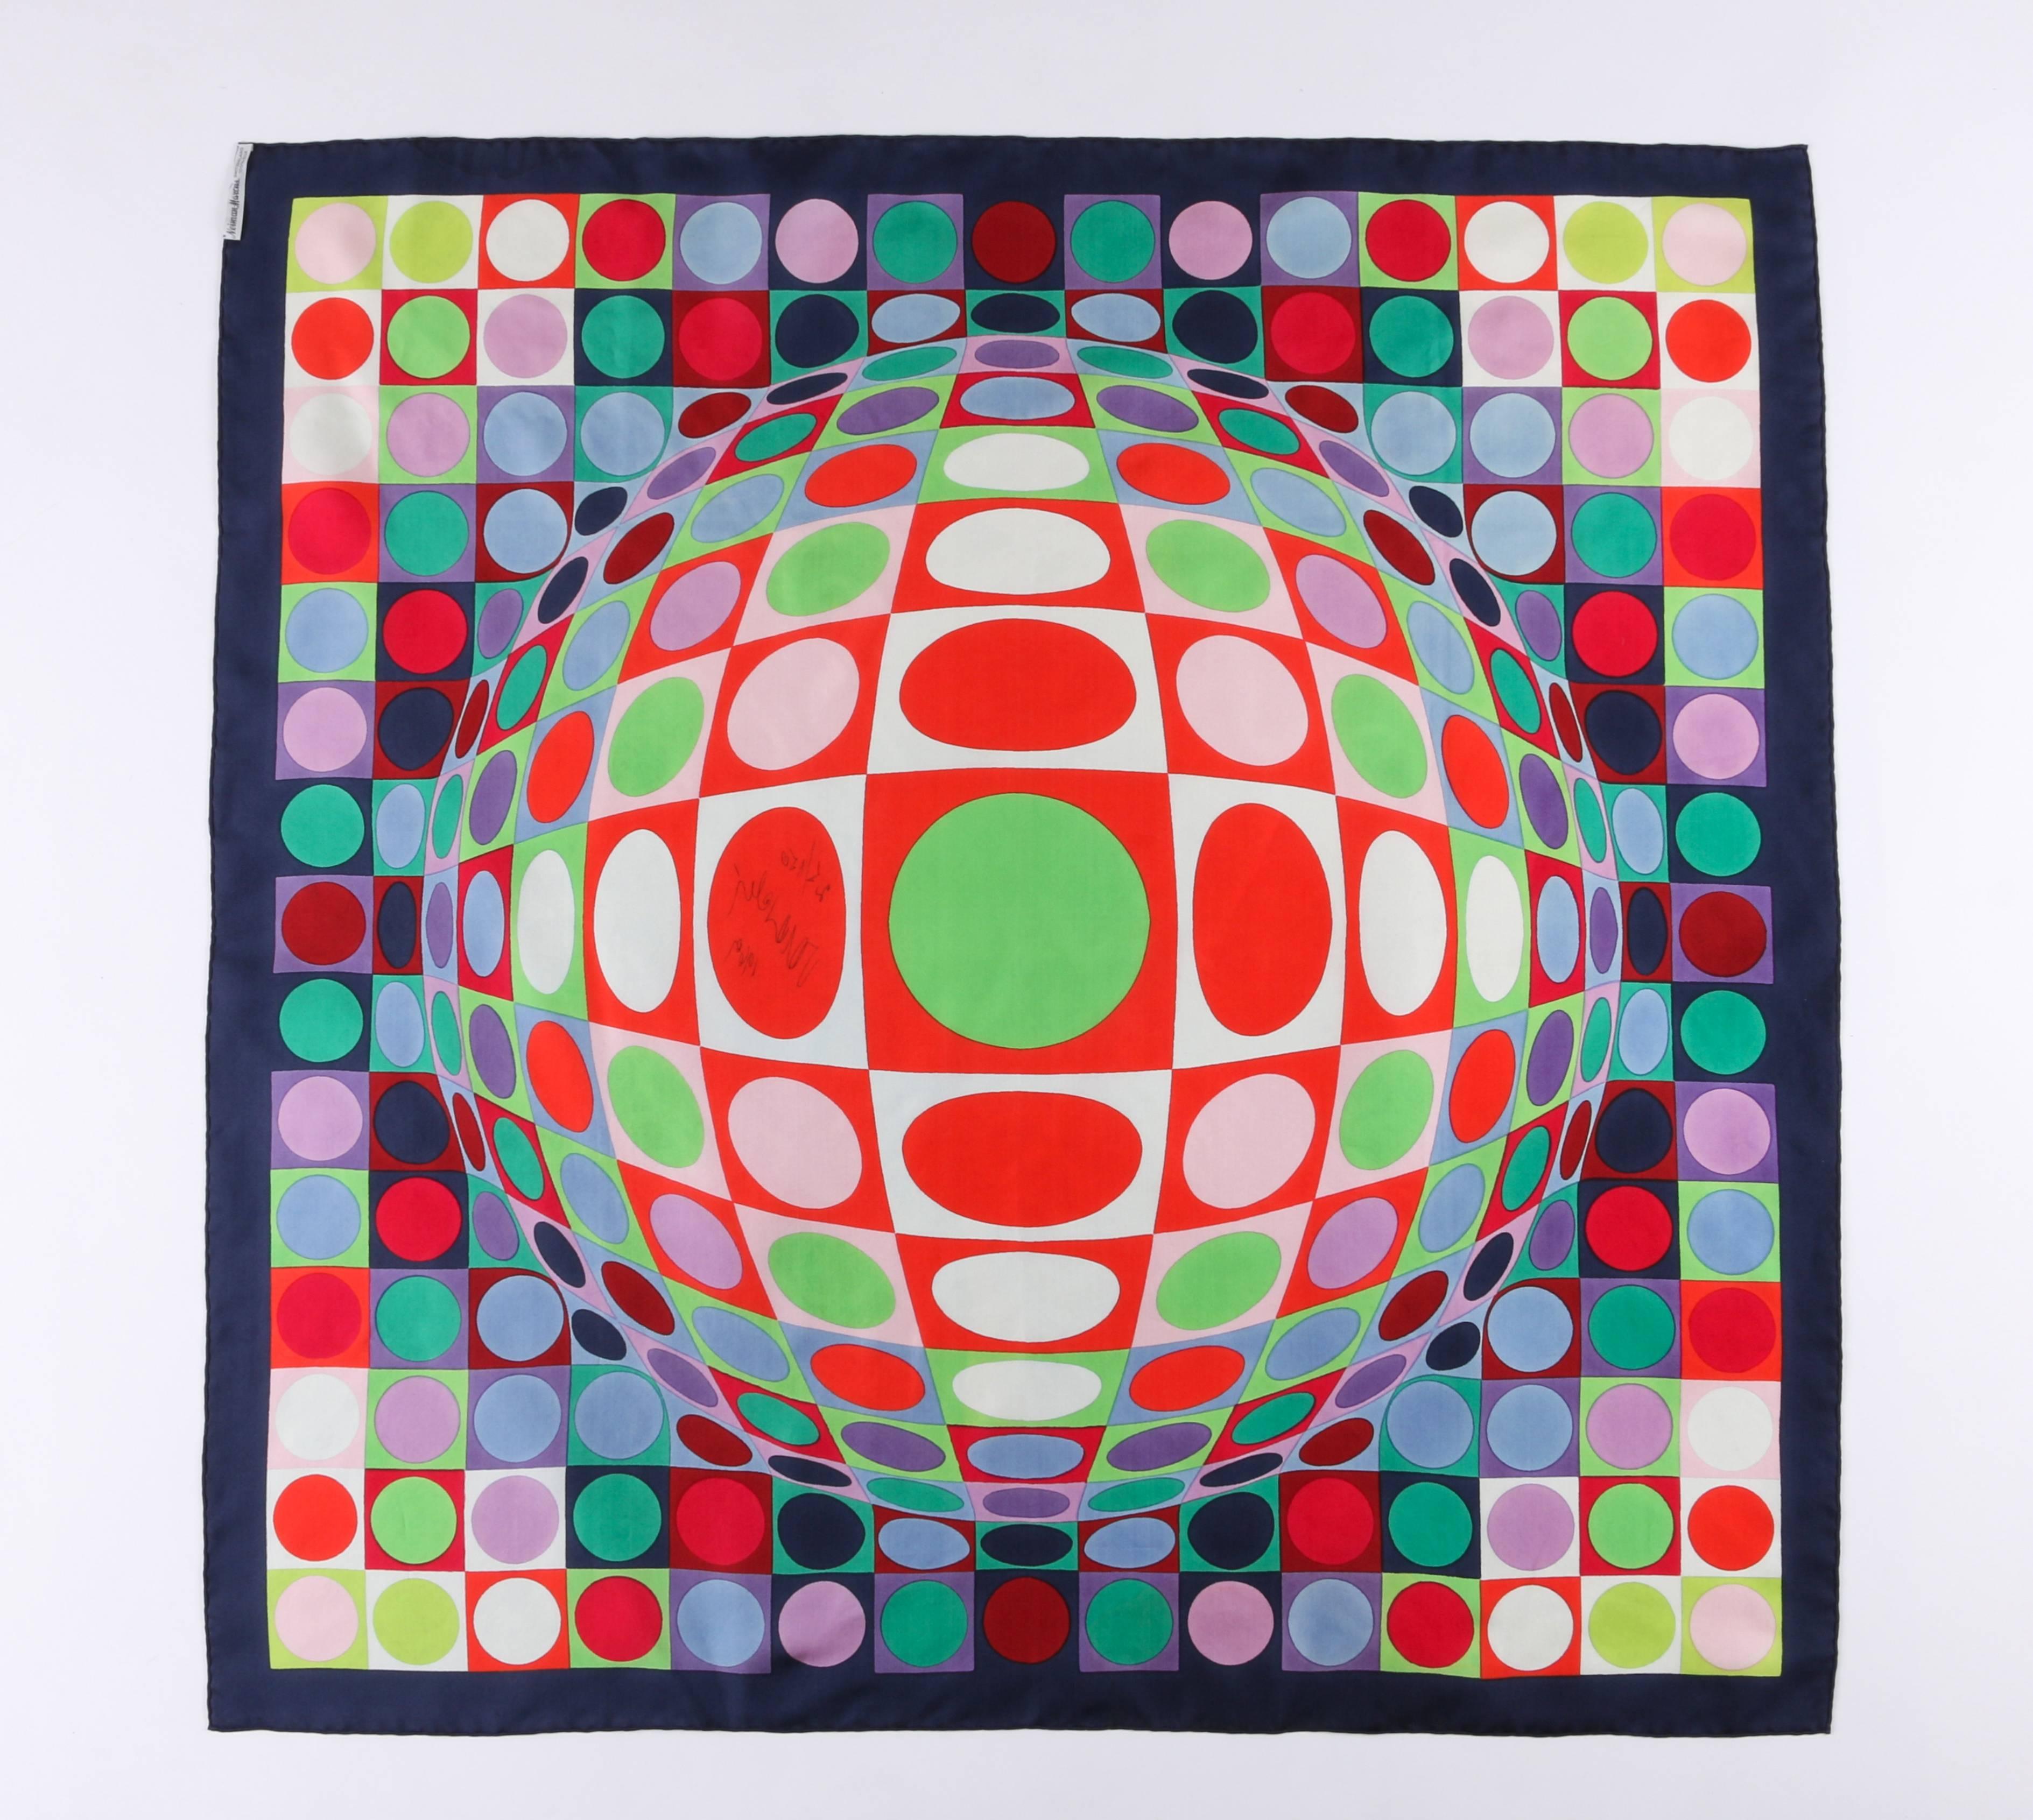 Victor Vasarely c.1969 "Vega MC Positive" op art scarf designed for Neiman Marcus. Limited edition & Numbered. Geometric op art silk screened print in shades of white, red, green, navy, and purple. Signed, dated, and numbered "25/150